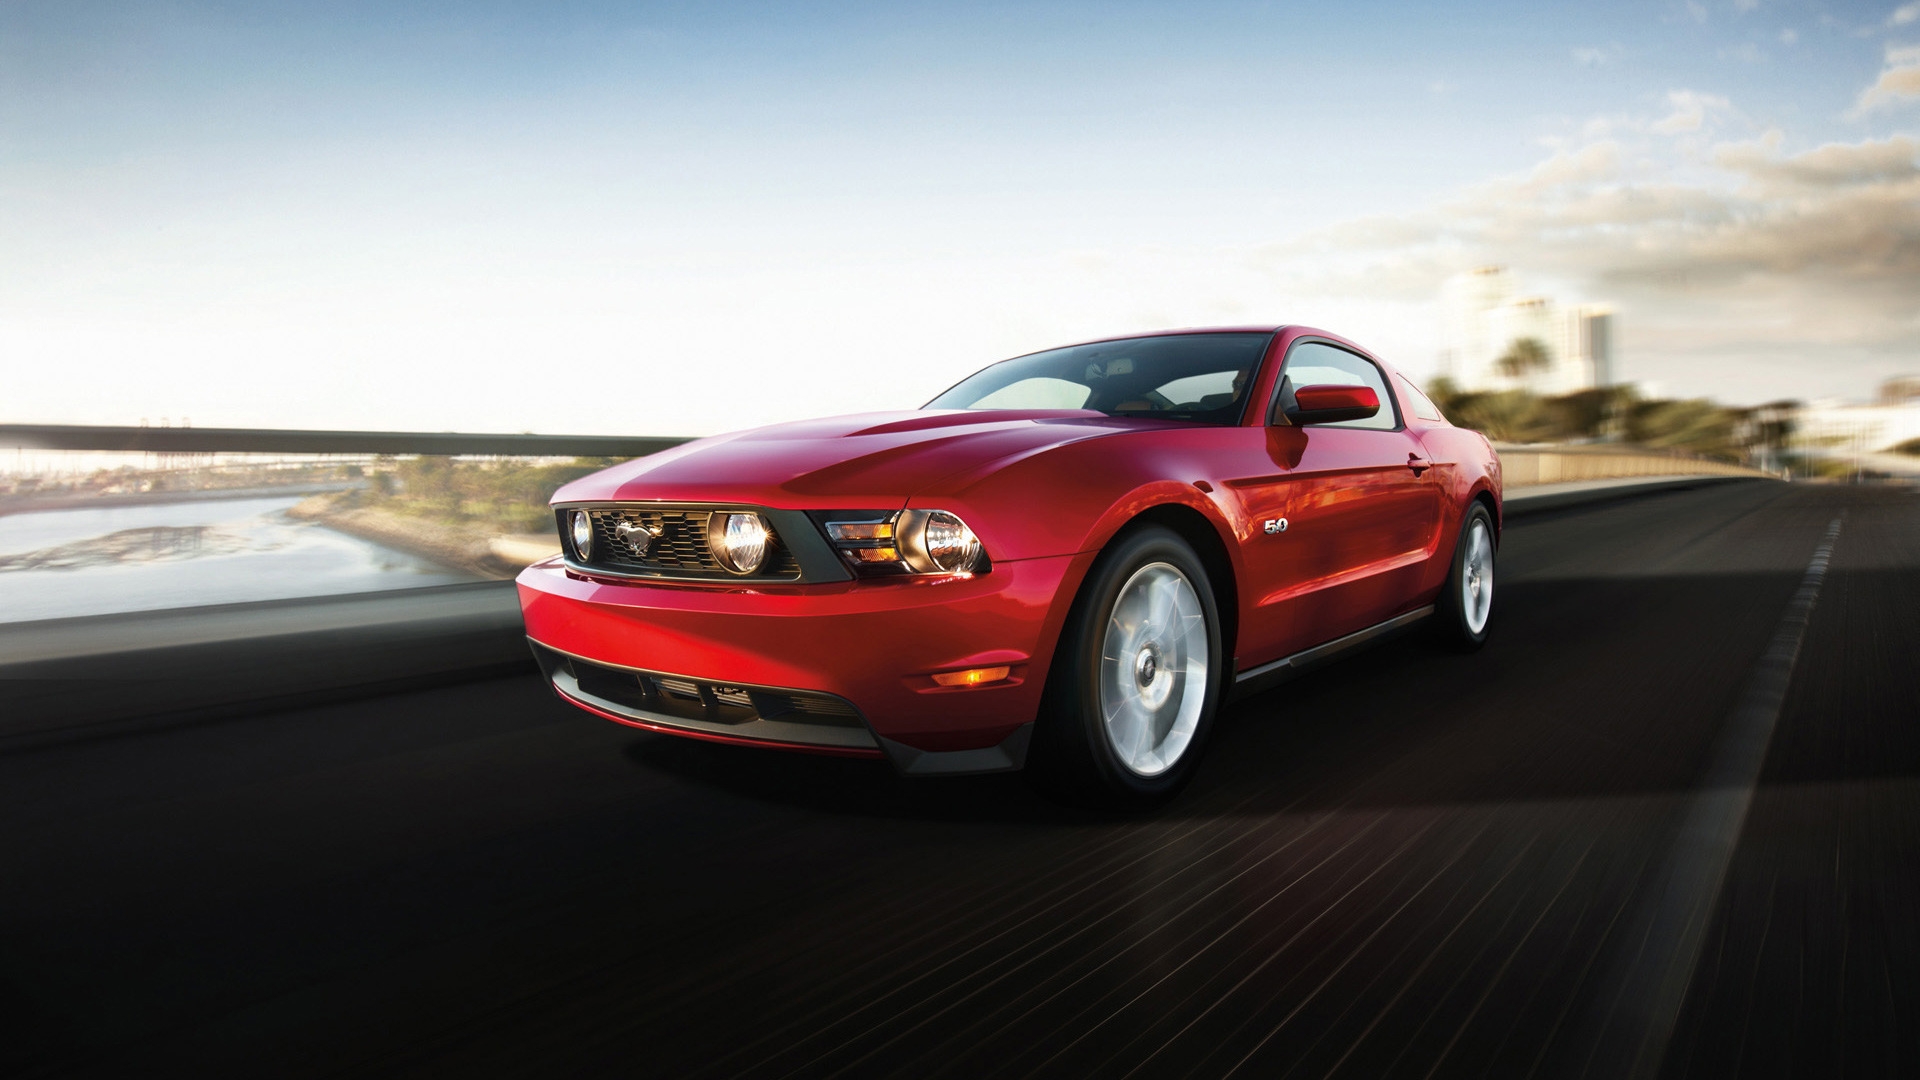 Ford Mustang GT 2012 for 1920 x 1080 HDTV 1080p resolution